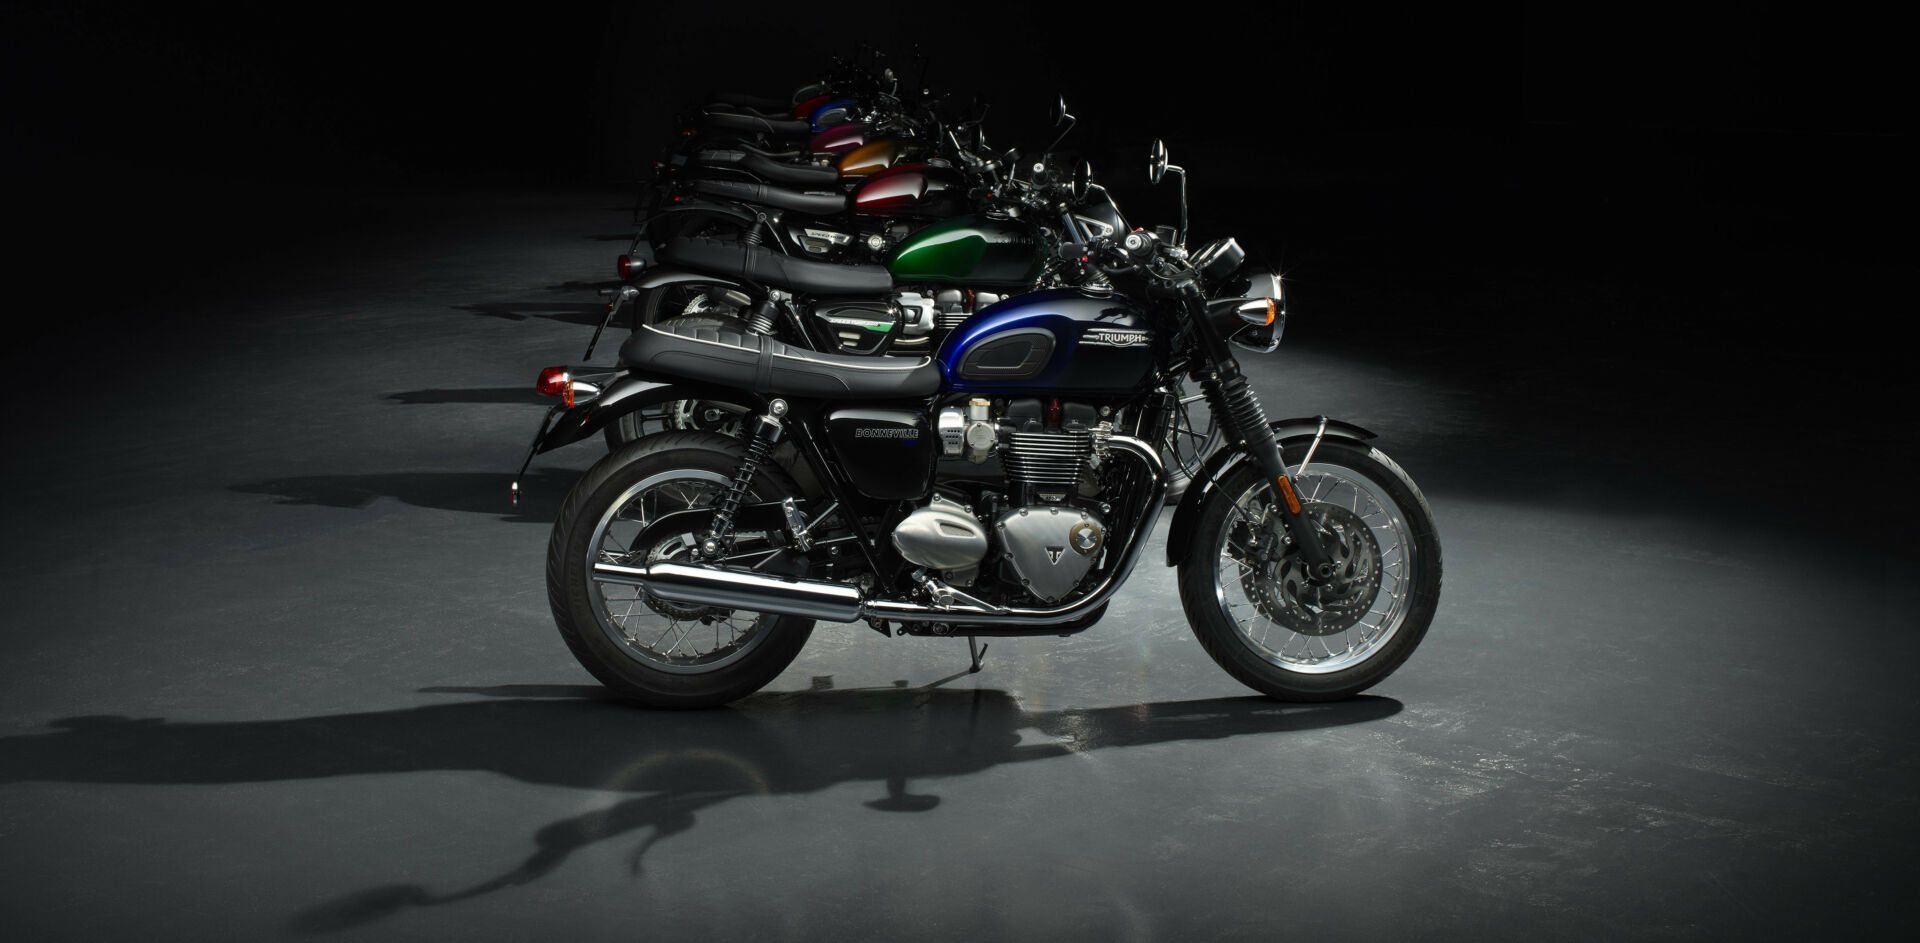 Triumph is releasing eight different Bonneville Stealth Edition models with custom paint jobs. Photo courtesy Triumph.